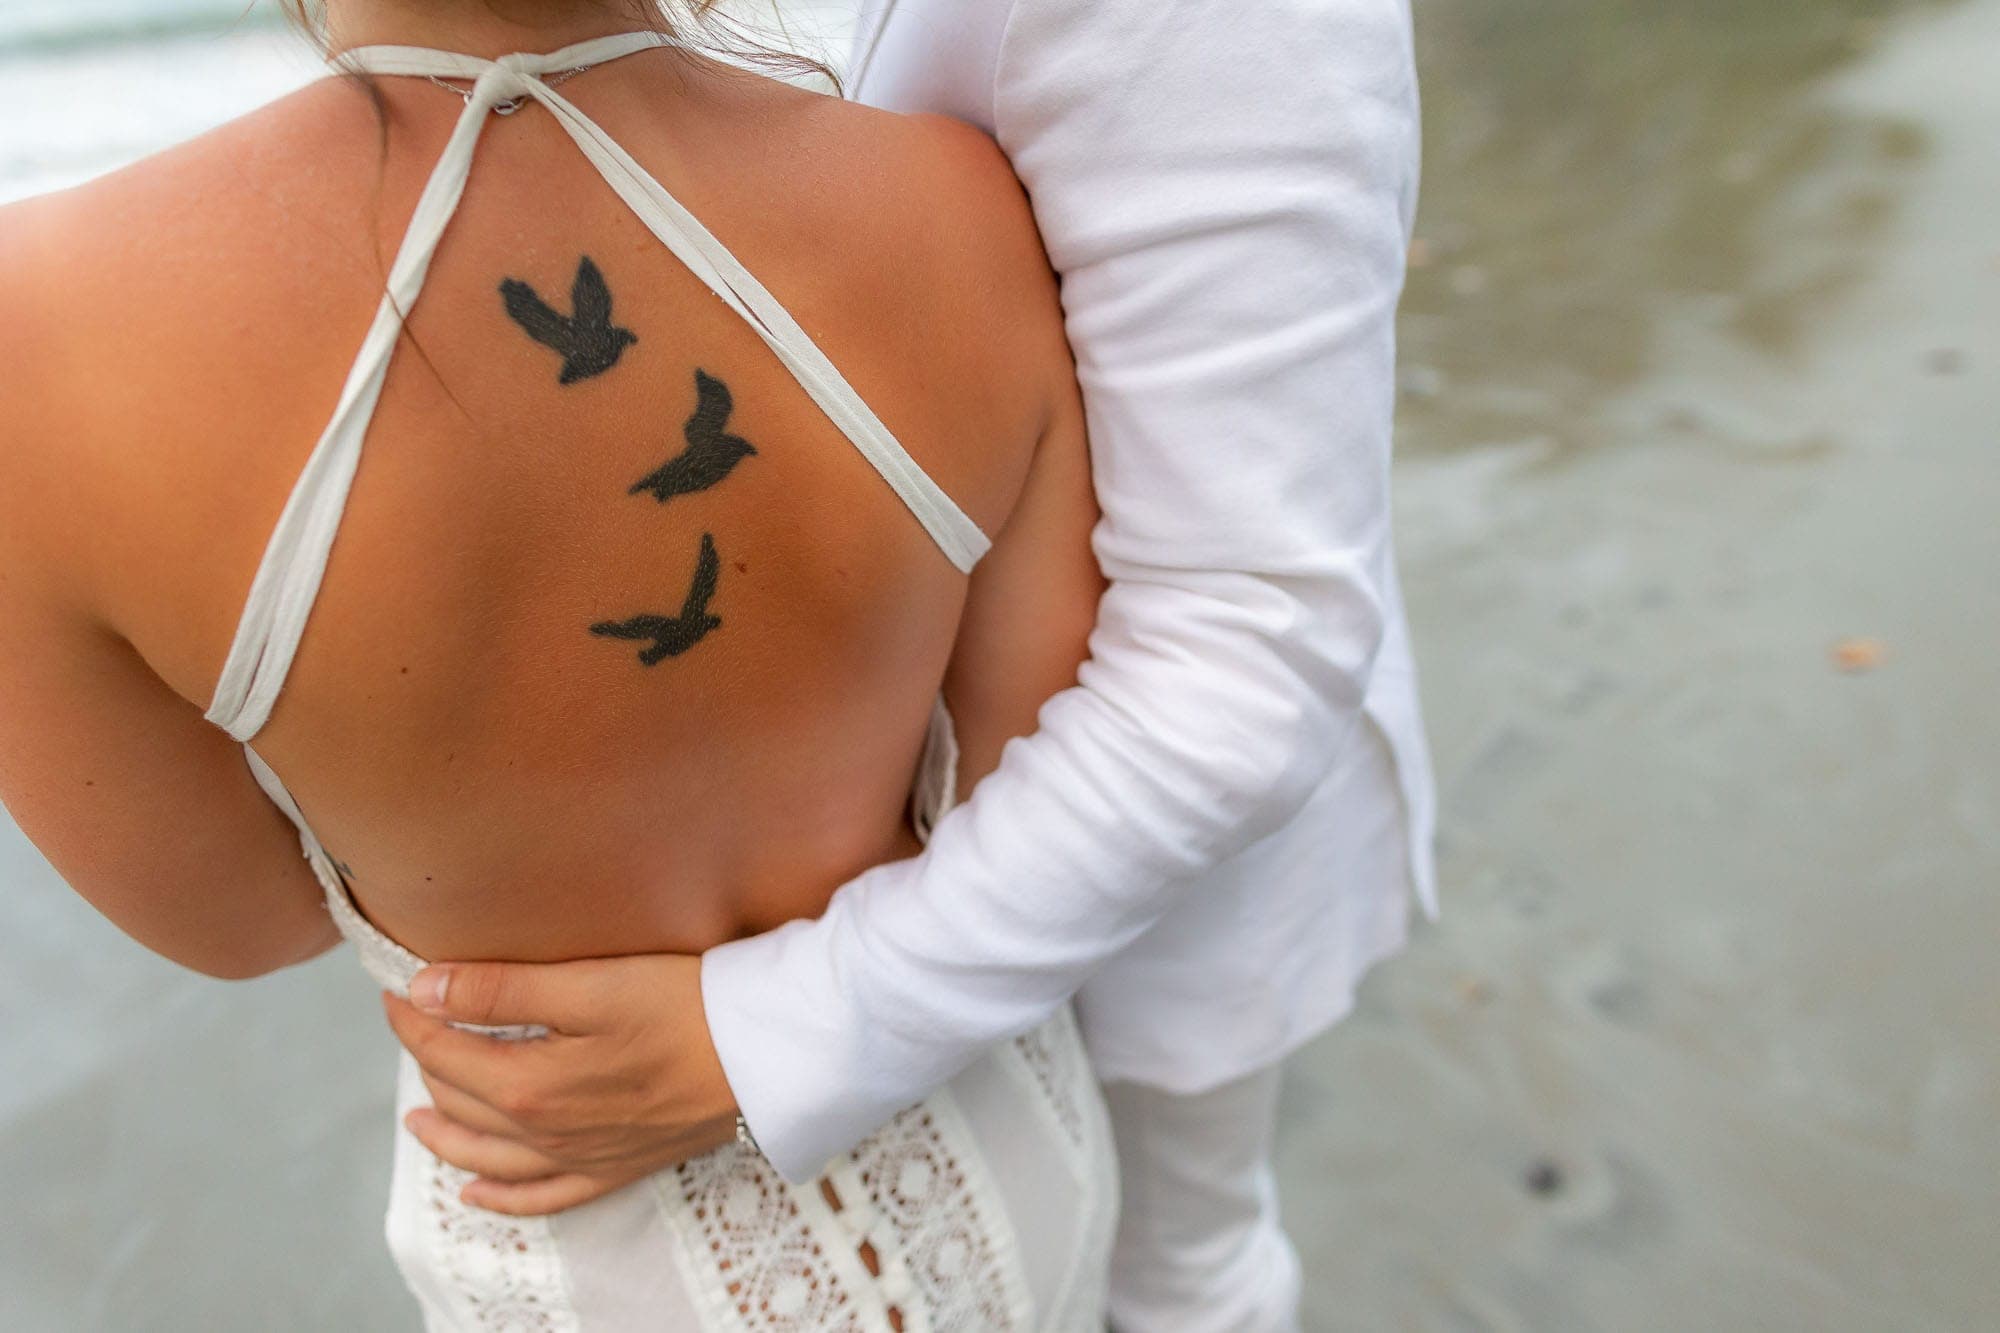 Closeup of the three birds tattoo on the bride's back